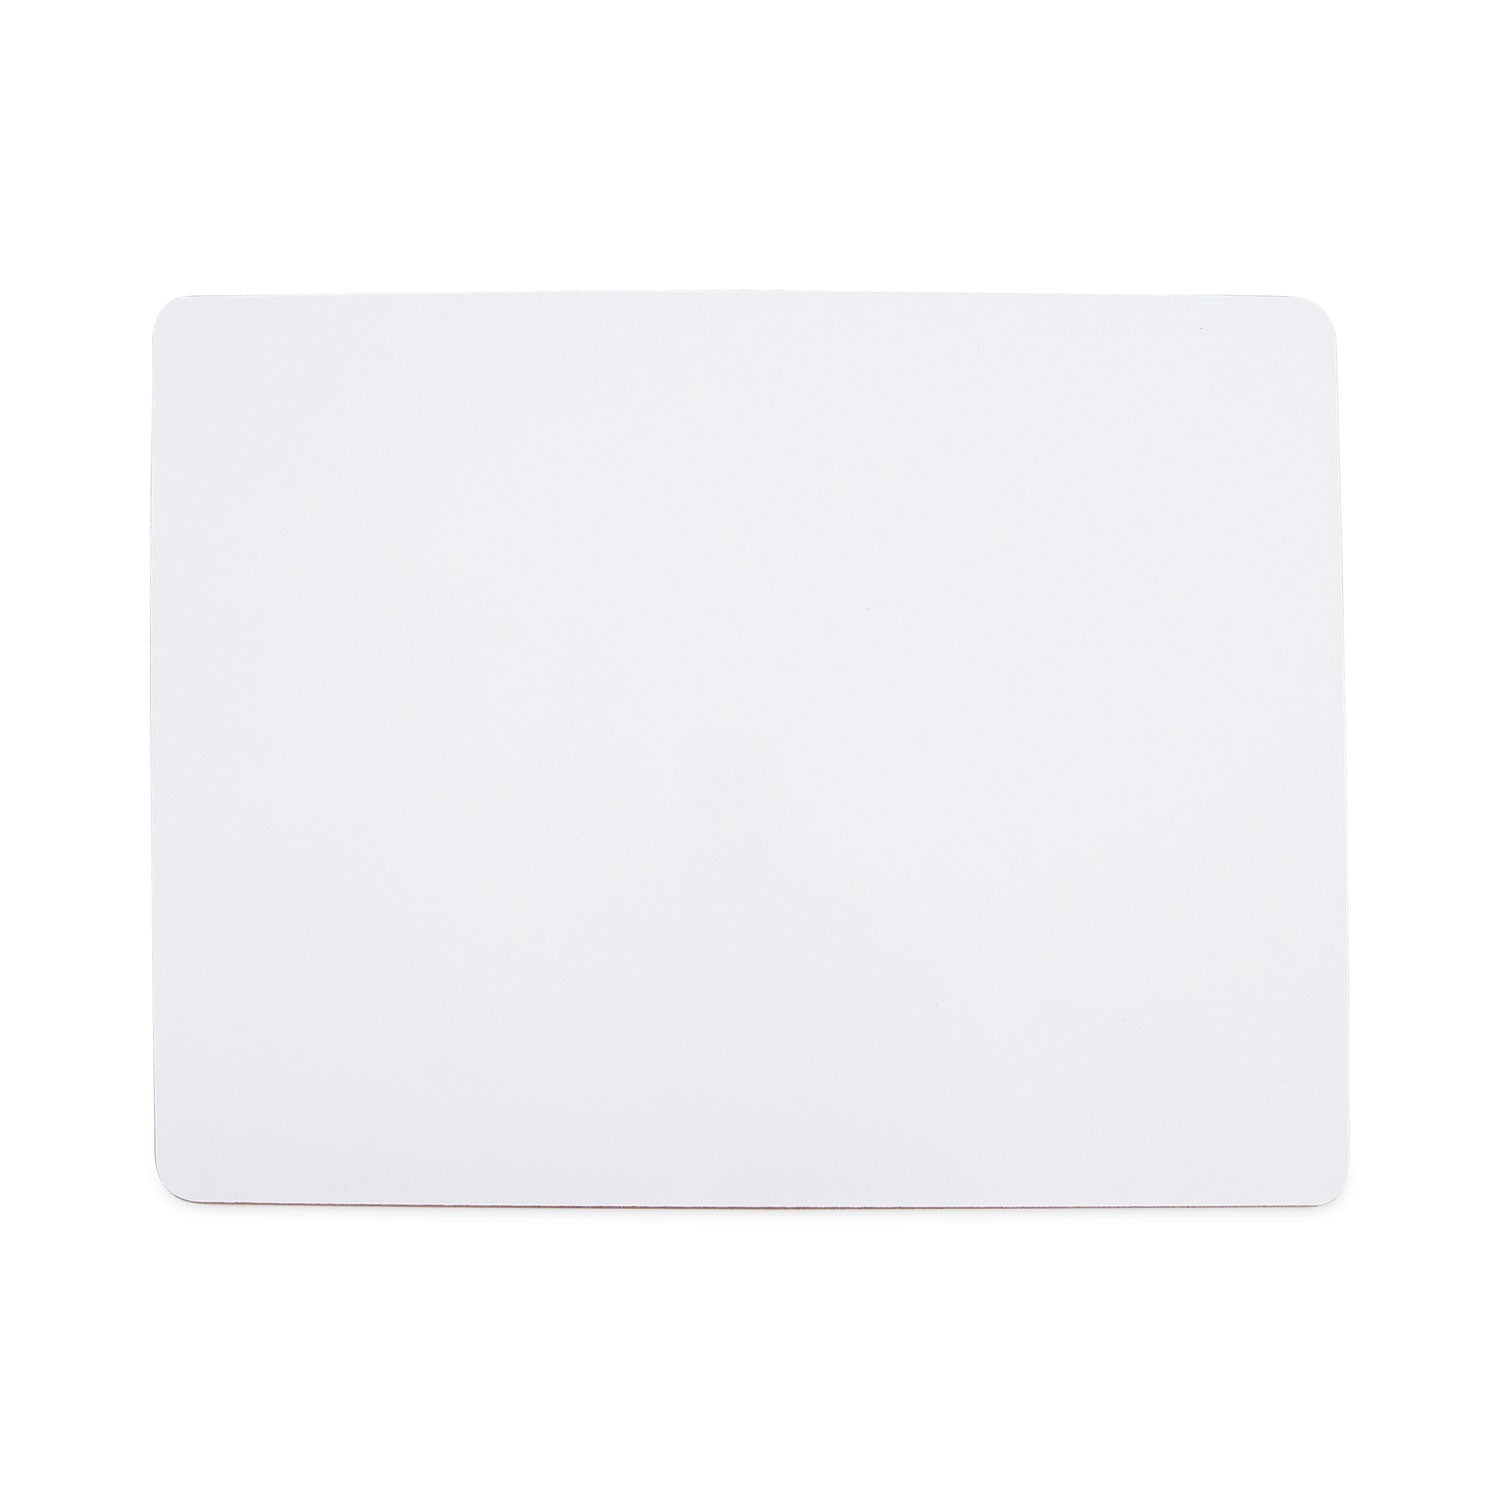 lap-learning-dry-erase-board-unruled-1175-x-875-white-surface-6-pack_unv43910 - 1